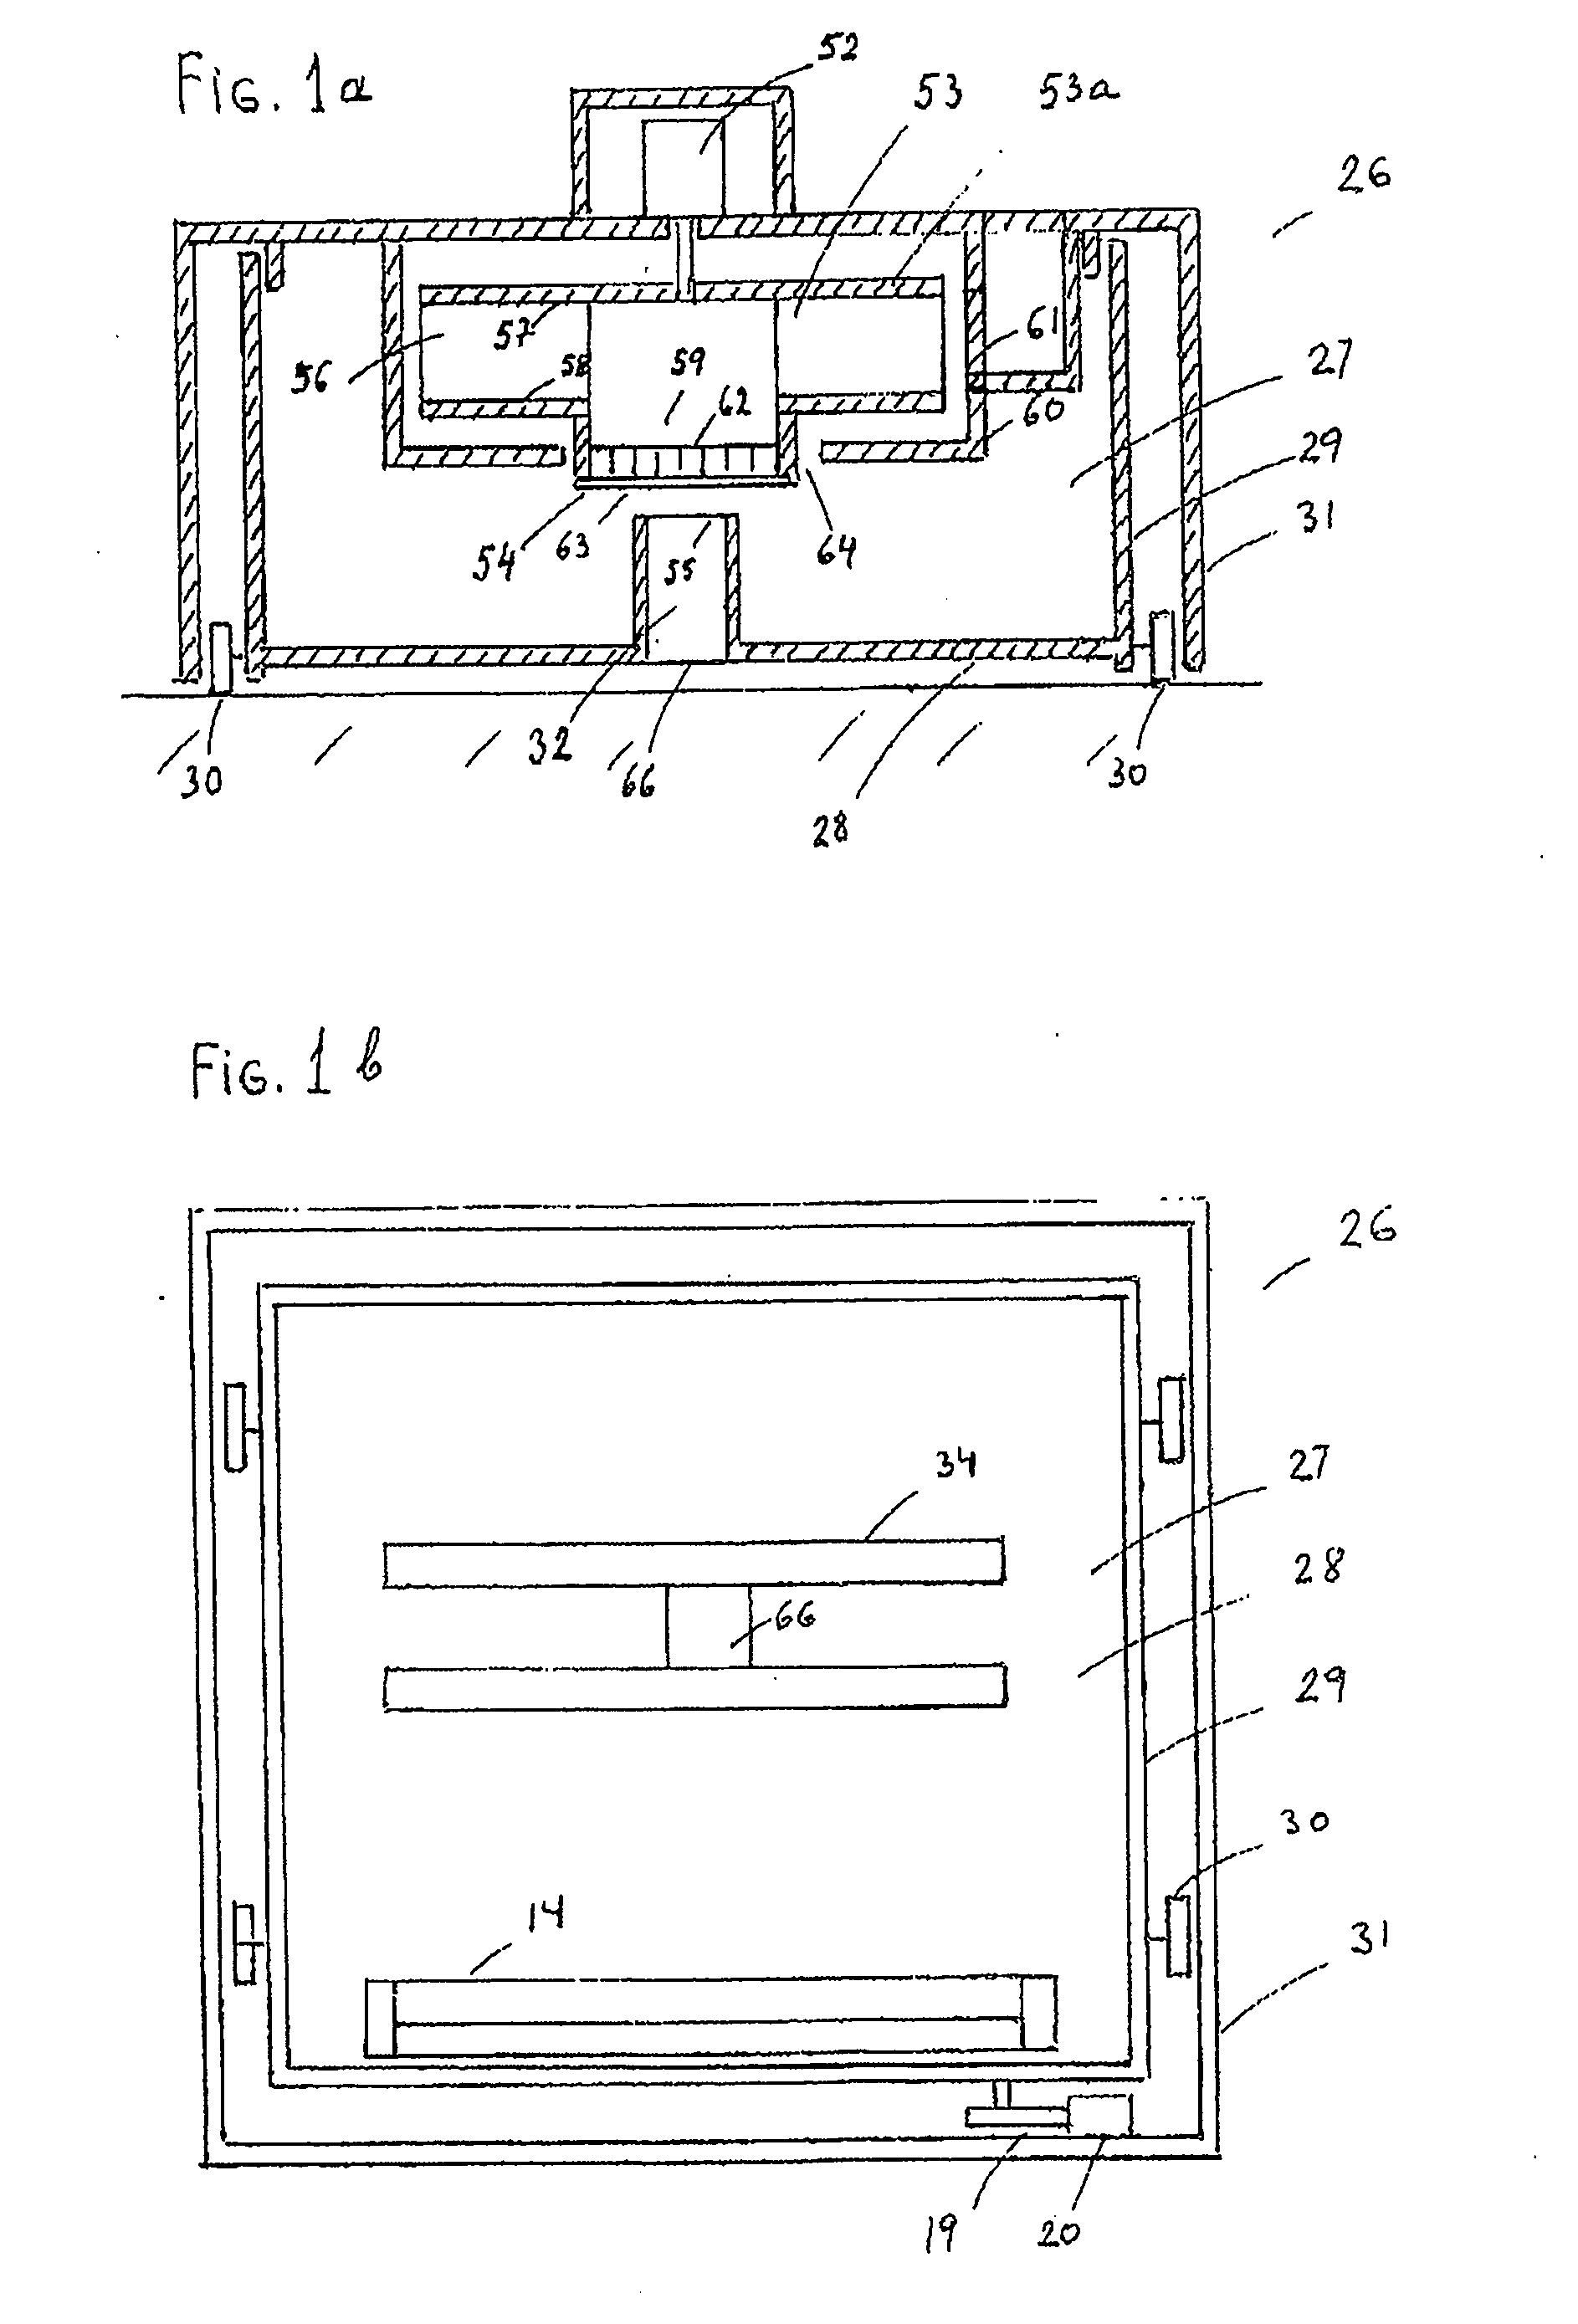 Cleaning and Sterilizing Apparatus Combined with an Ultra-Violet Lamp